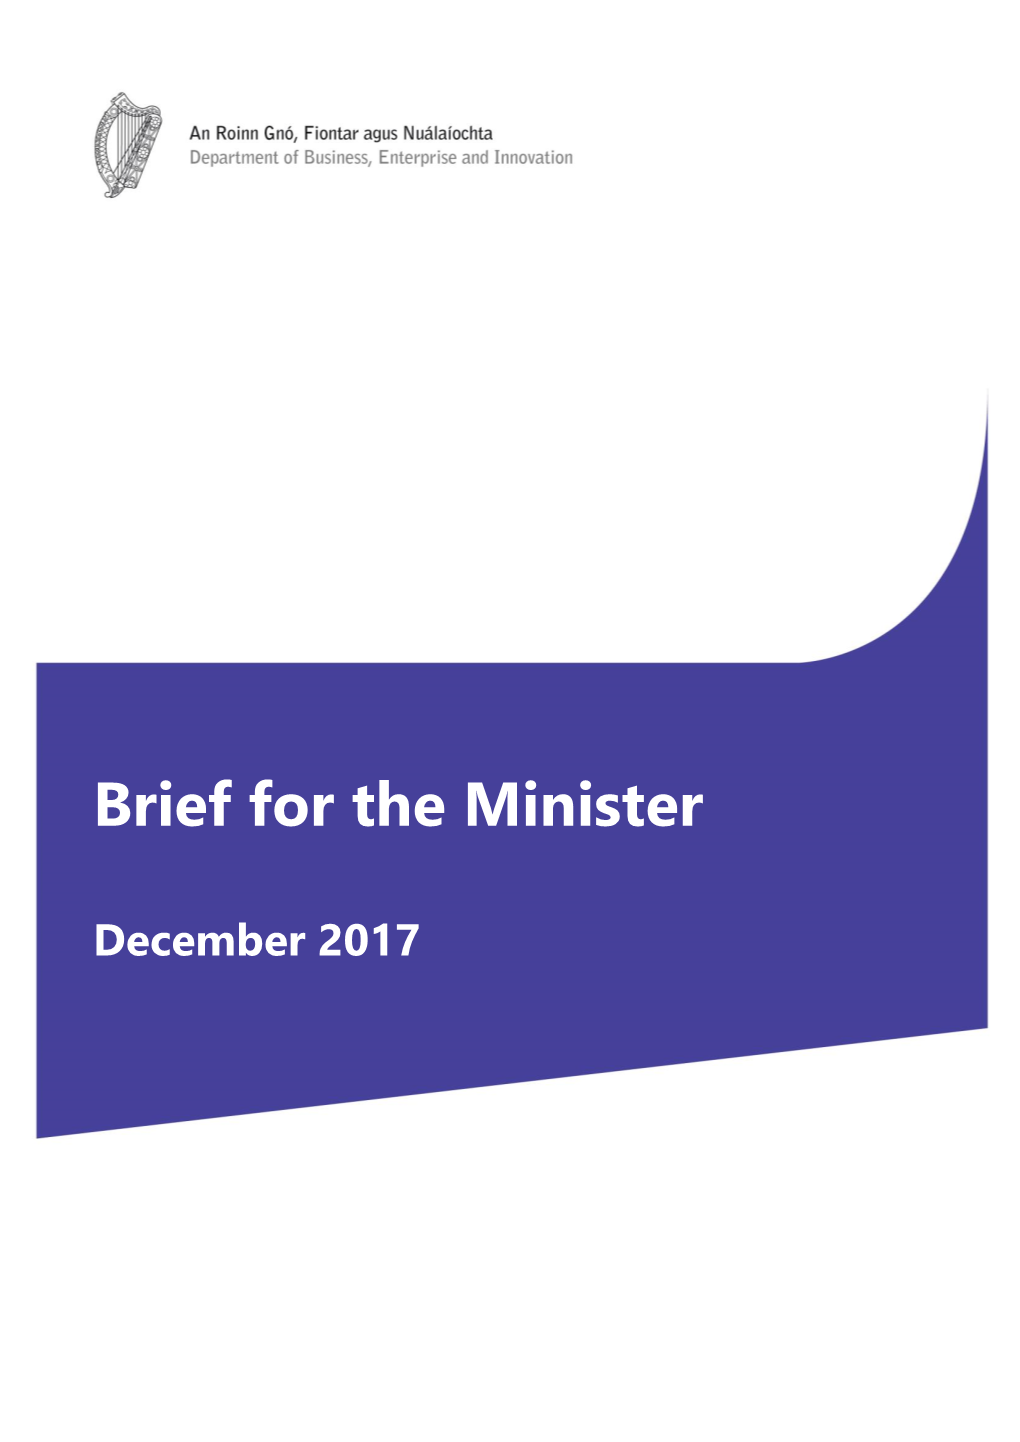 Department Brief for Minister December 2017